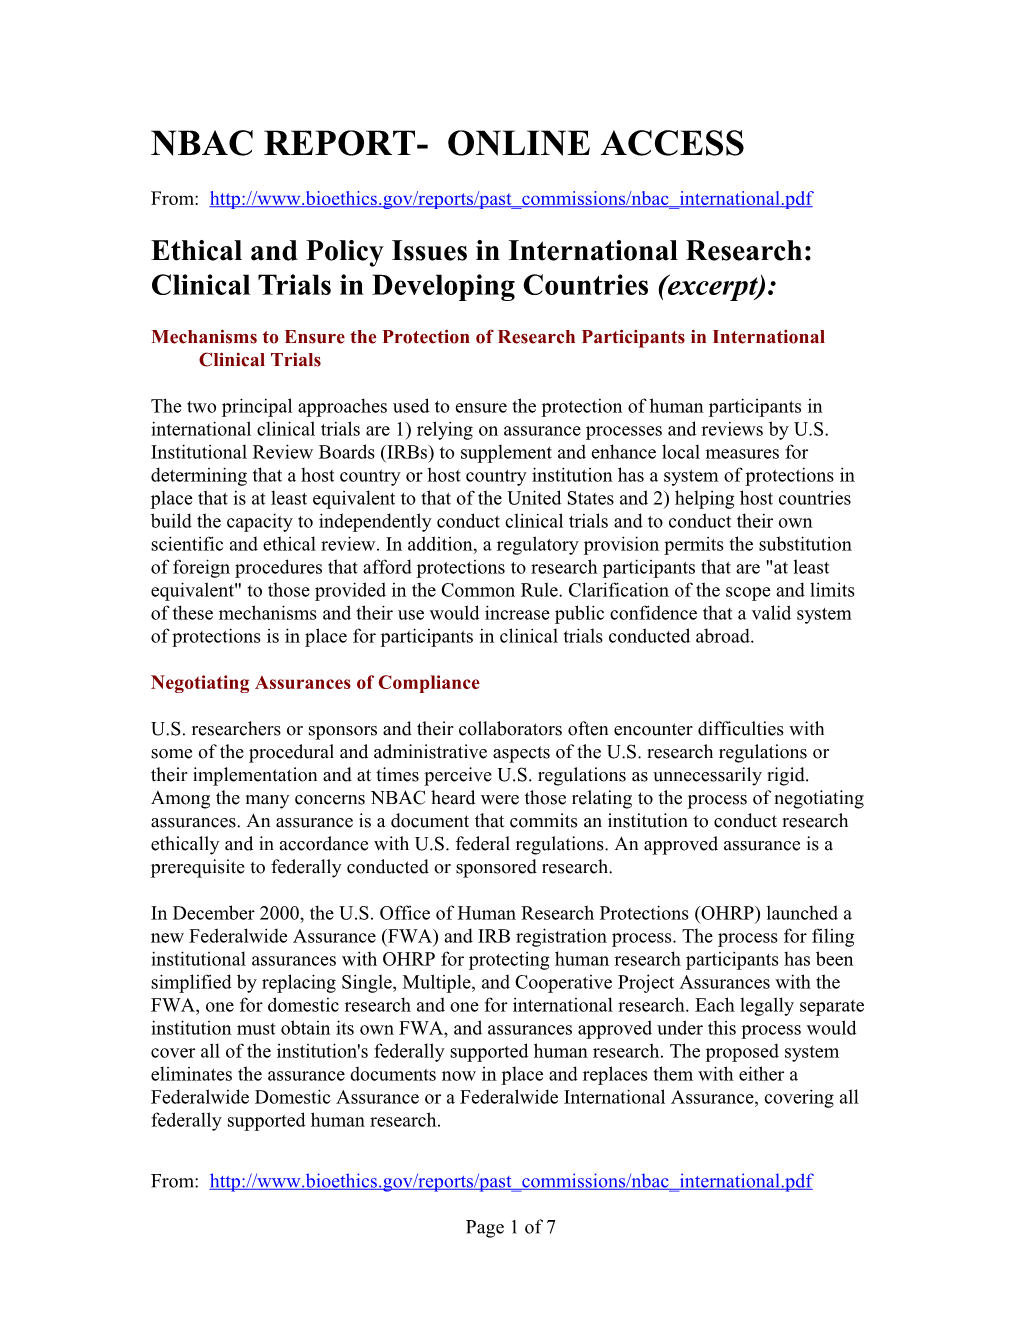 Ethical and Policy Issues in International Research